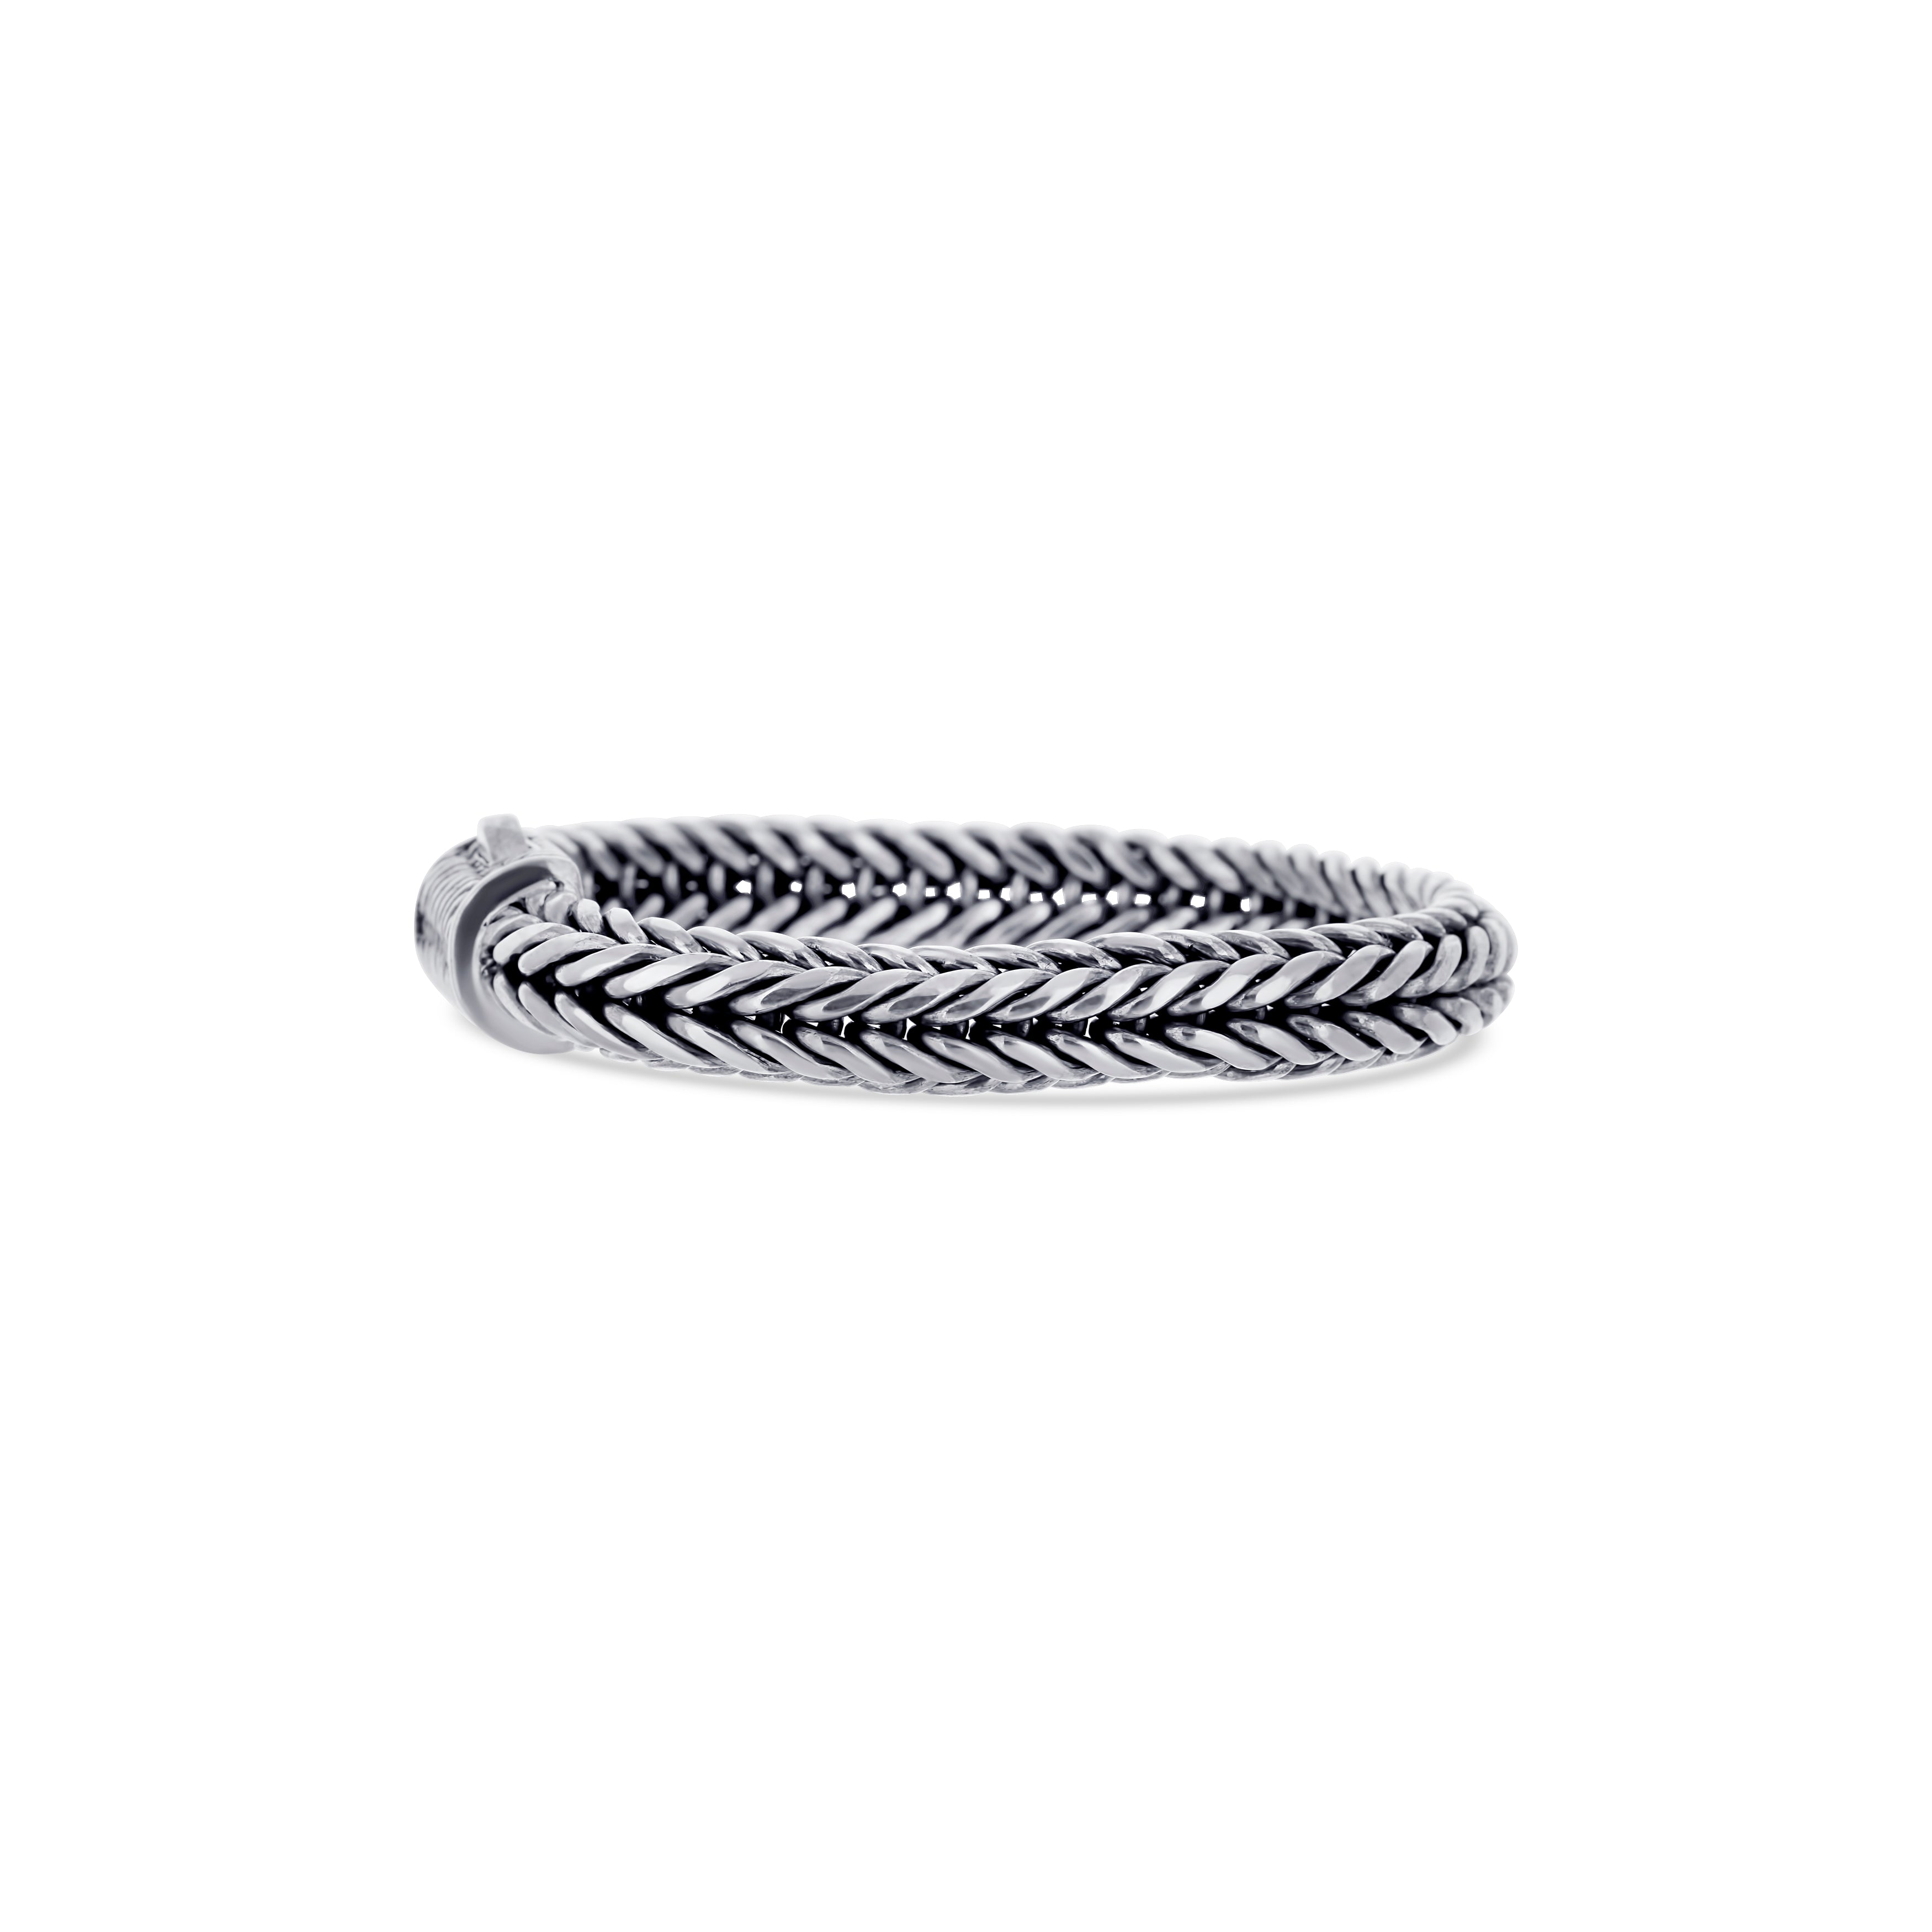 Men's Sterling Silver Braided Bracelet With Fishtail Braid Clasp